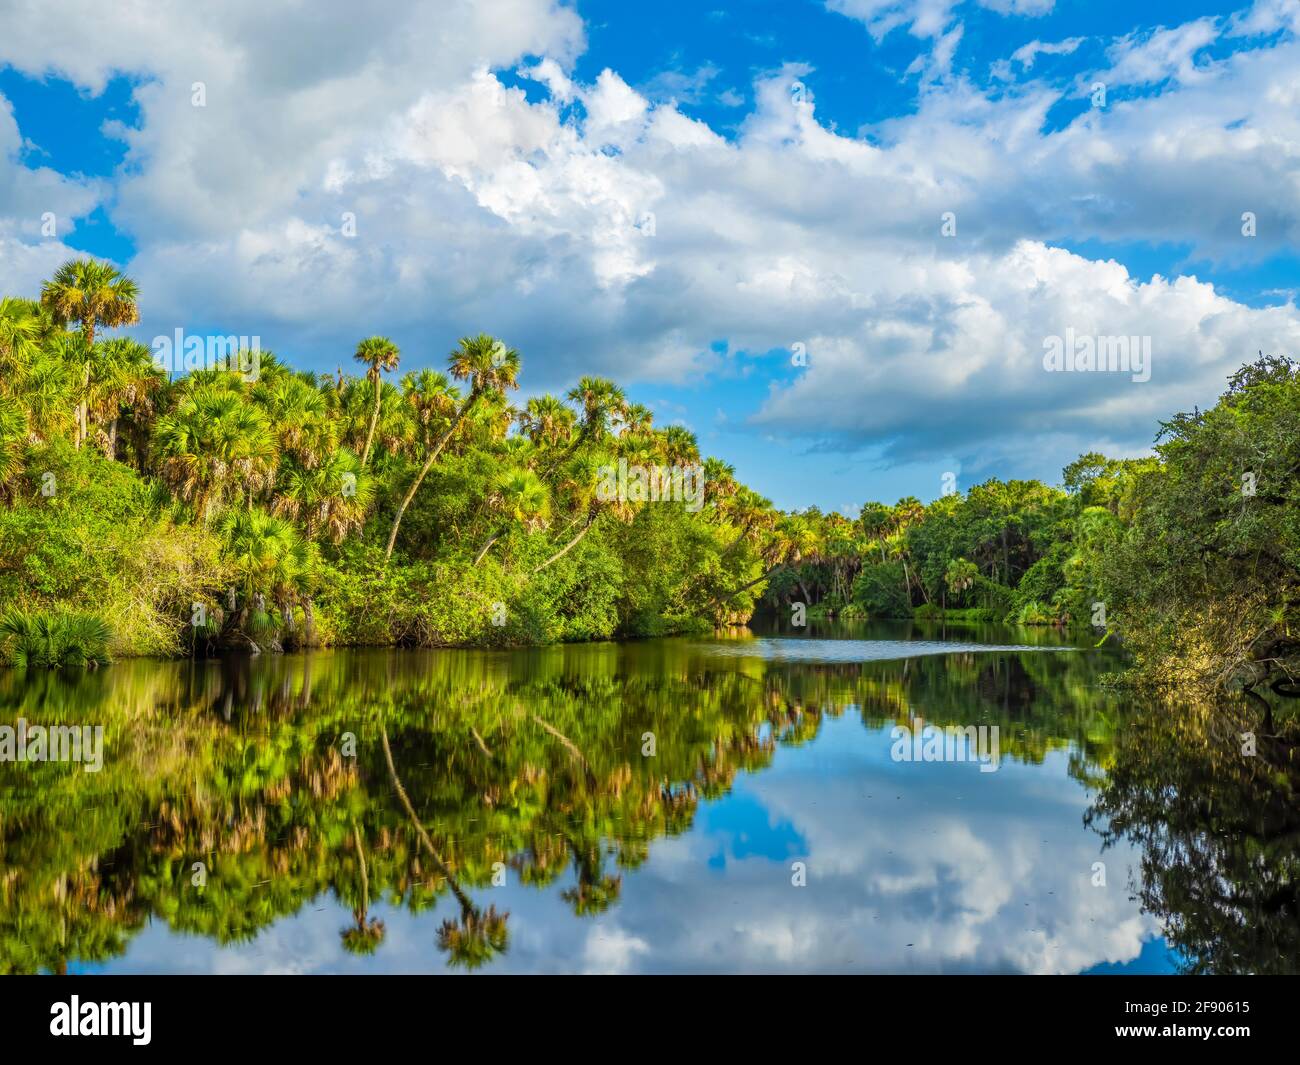 Trees and clouds reflected in river, Myakka River, Venice, Florida, USA Stock Photo